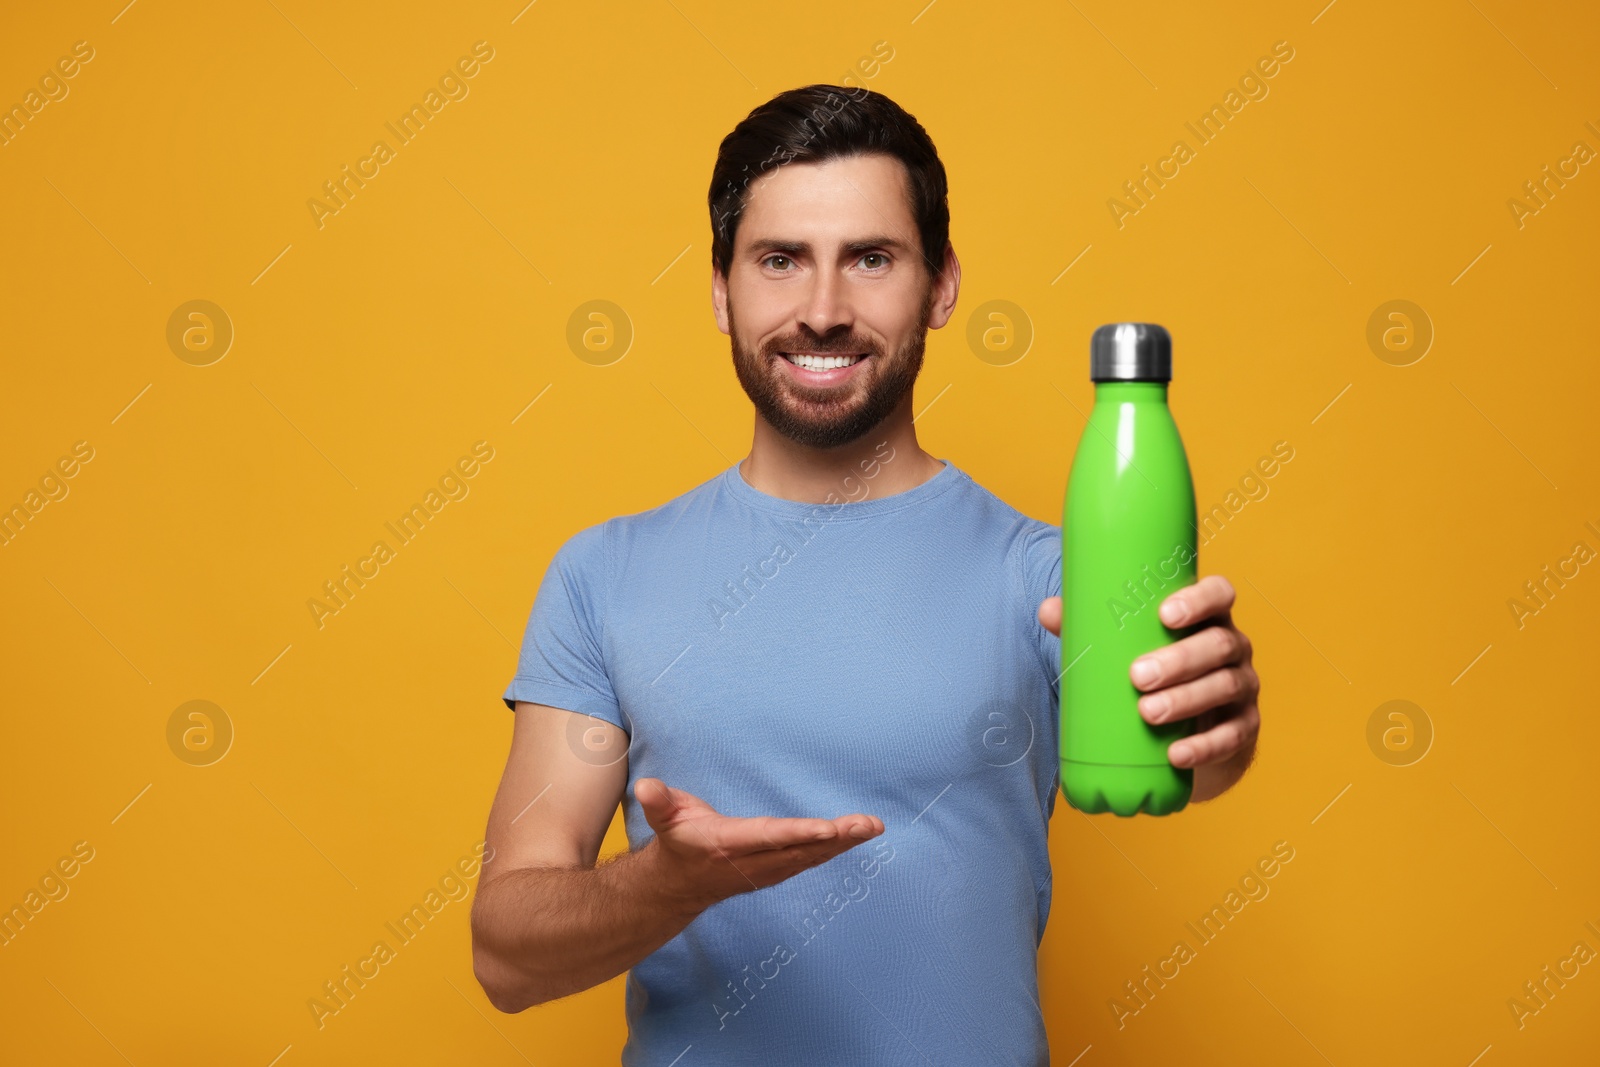 Photo of Man with green thermo bottle on orange background